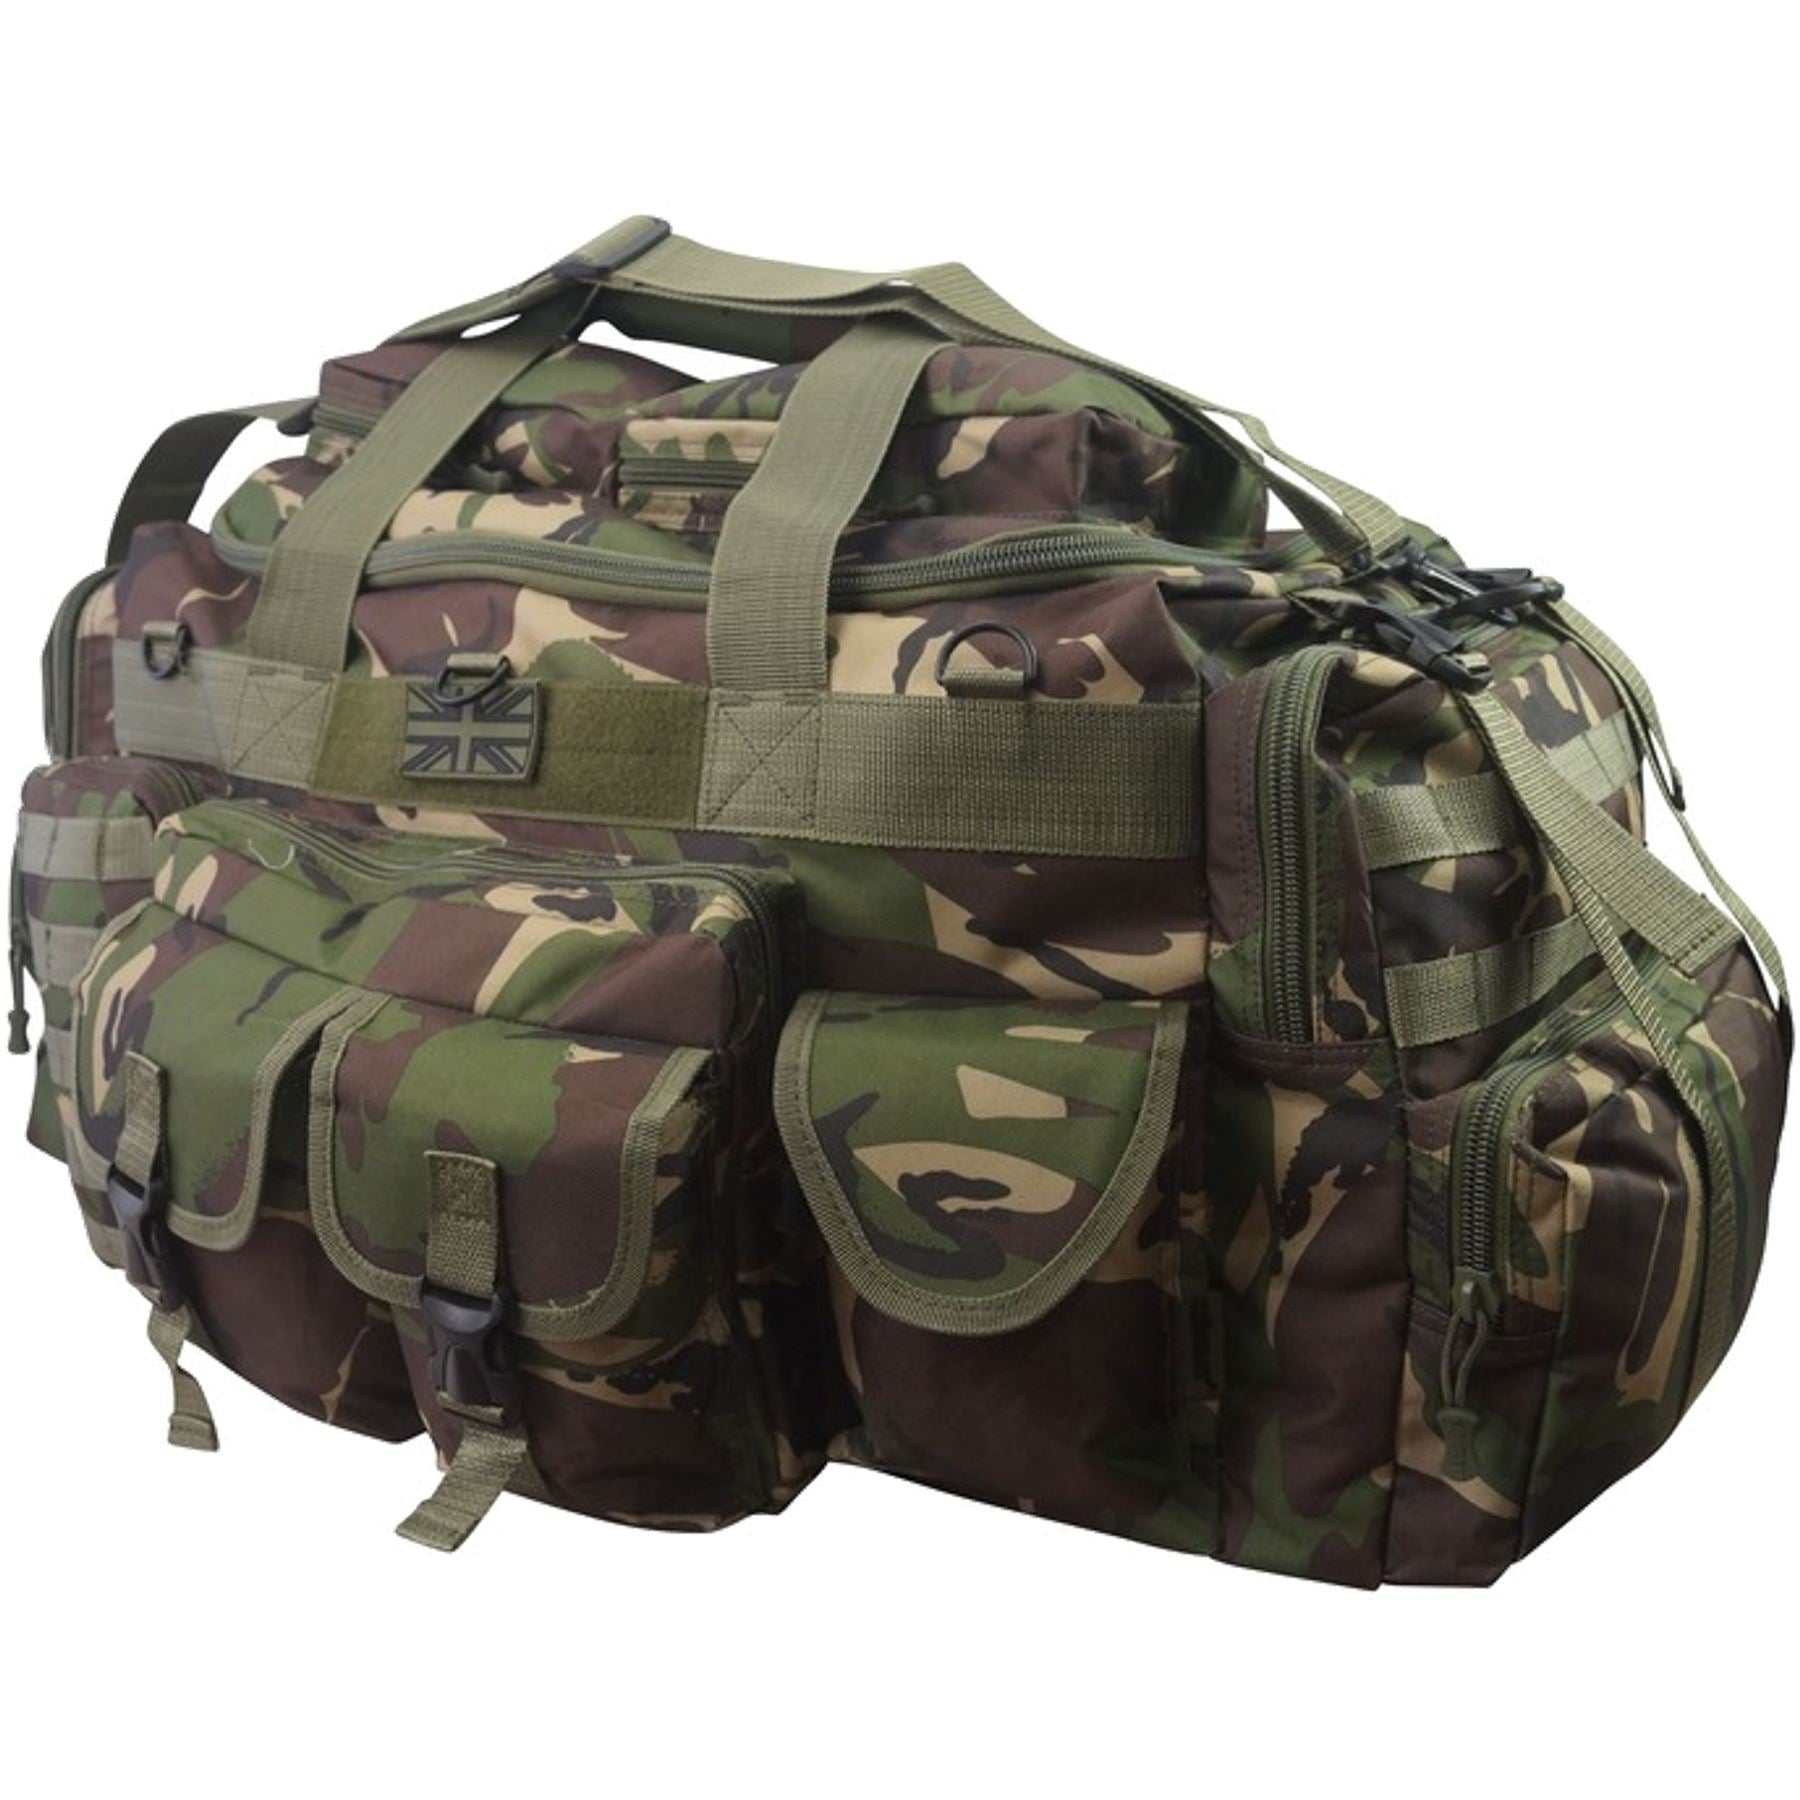 Kombat Saxon Tactical Army Military Camouflage Holdall Molle Bag Rucksack 100L